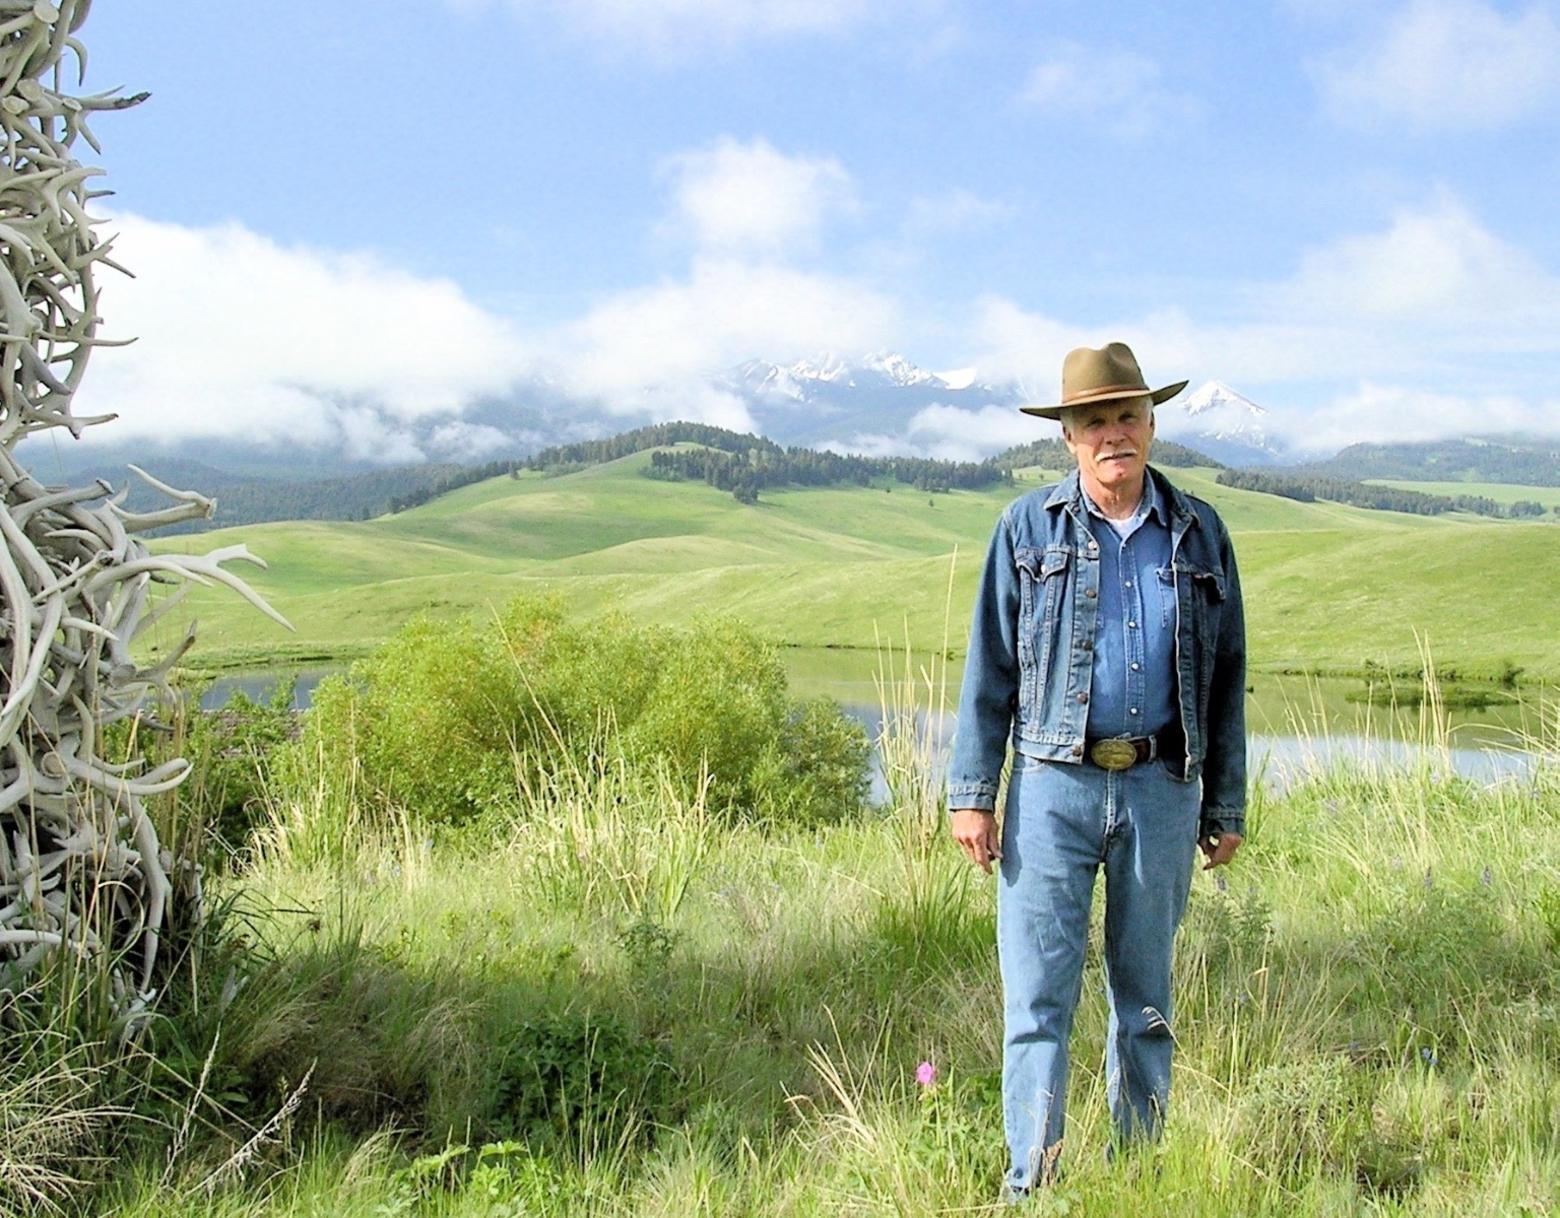 Ted Turner at his 113,613-acre Flying D Ranch southwest of Bozeman, Montana.  More than a quarter century ago, Turner put a conservation easement on the ranch through The Nature Conservancy that, at the time, ranked as one of the largest ever.  Had Turner not protected the ranch, which provides crucial habitat for public wildlife at the northern end of the Madison Range, the land in the hands of real estate developers would likely today be covered with homes, golf courses and other exurban amenities. Its protection enhances the quality of wildness on adjacent public lands. Photo by Todd Wilkinson